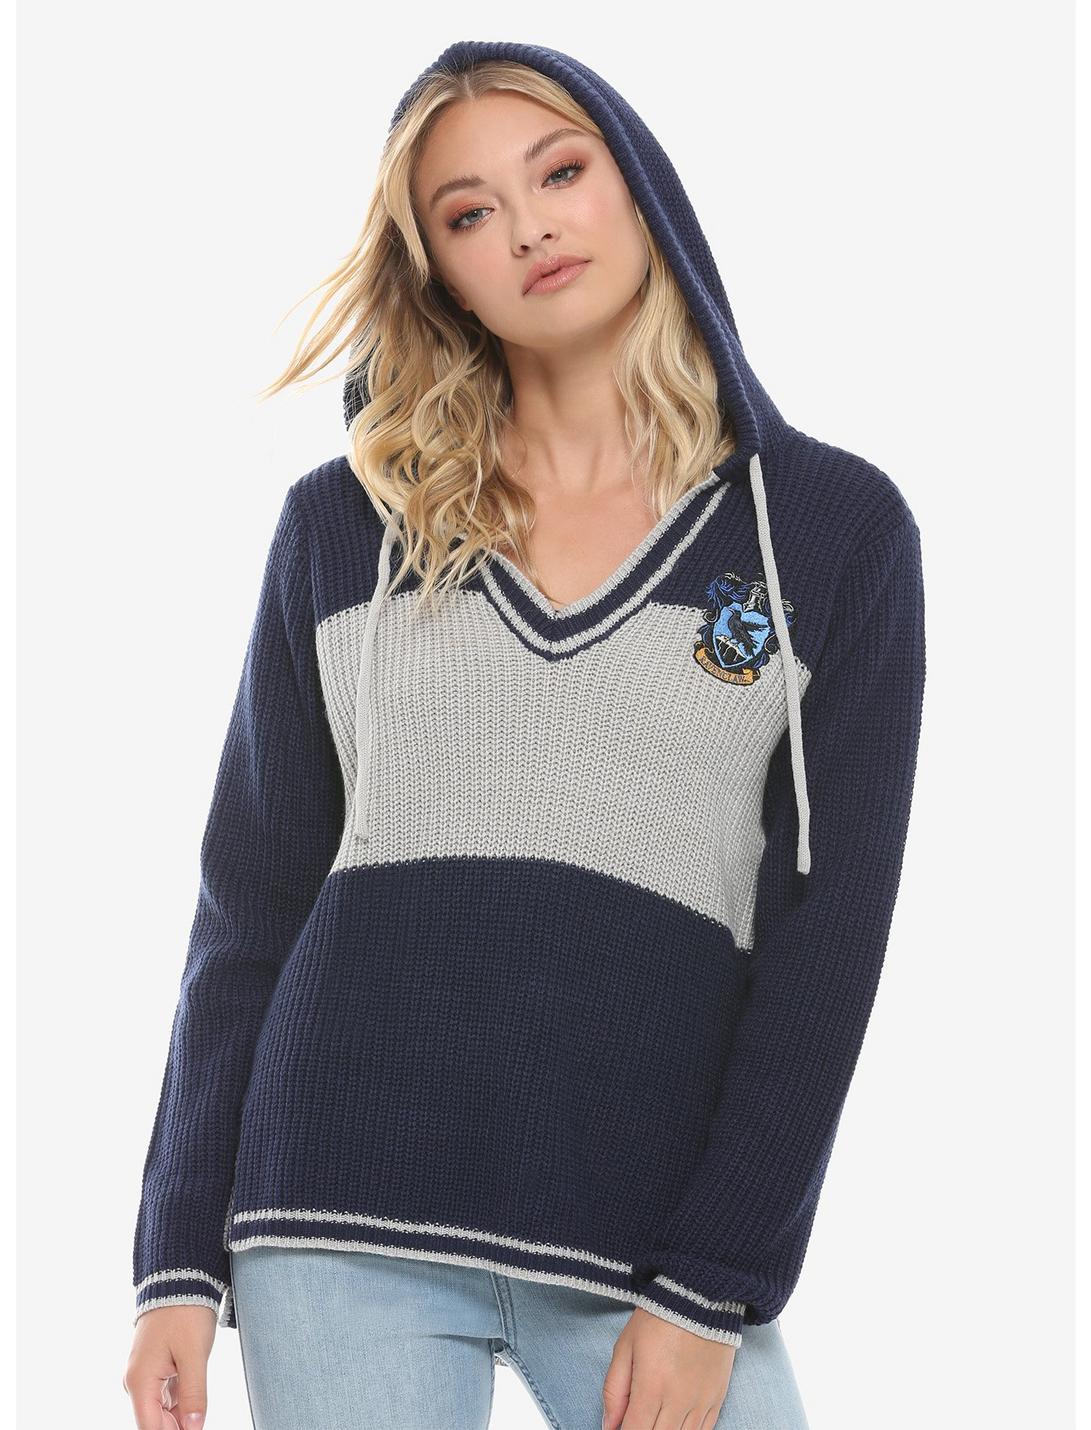 Harry Potter Ravenclaw Hooded Sweater, MULTI, hi-res